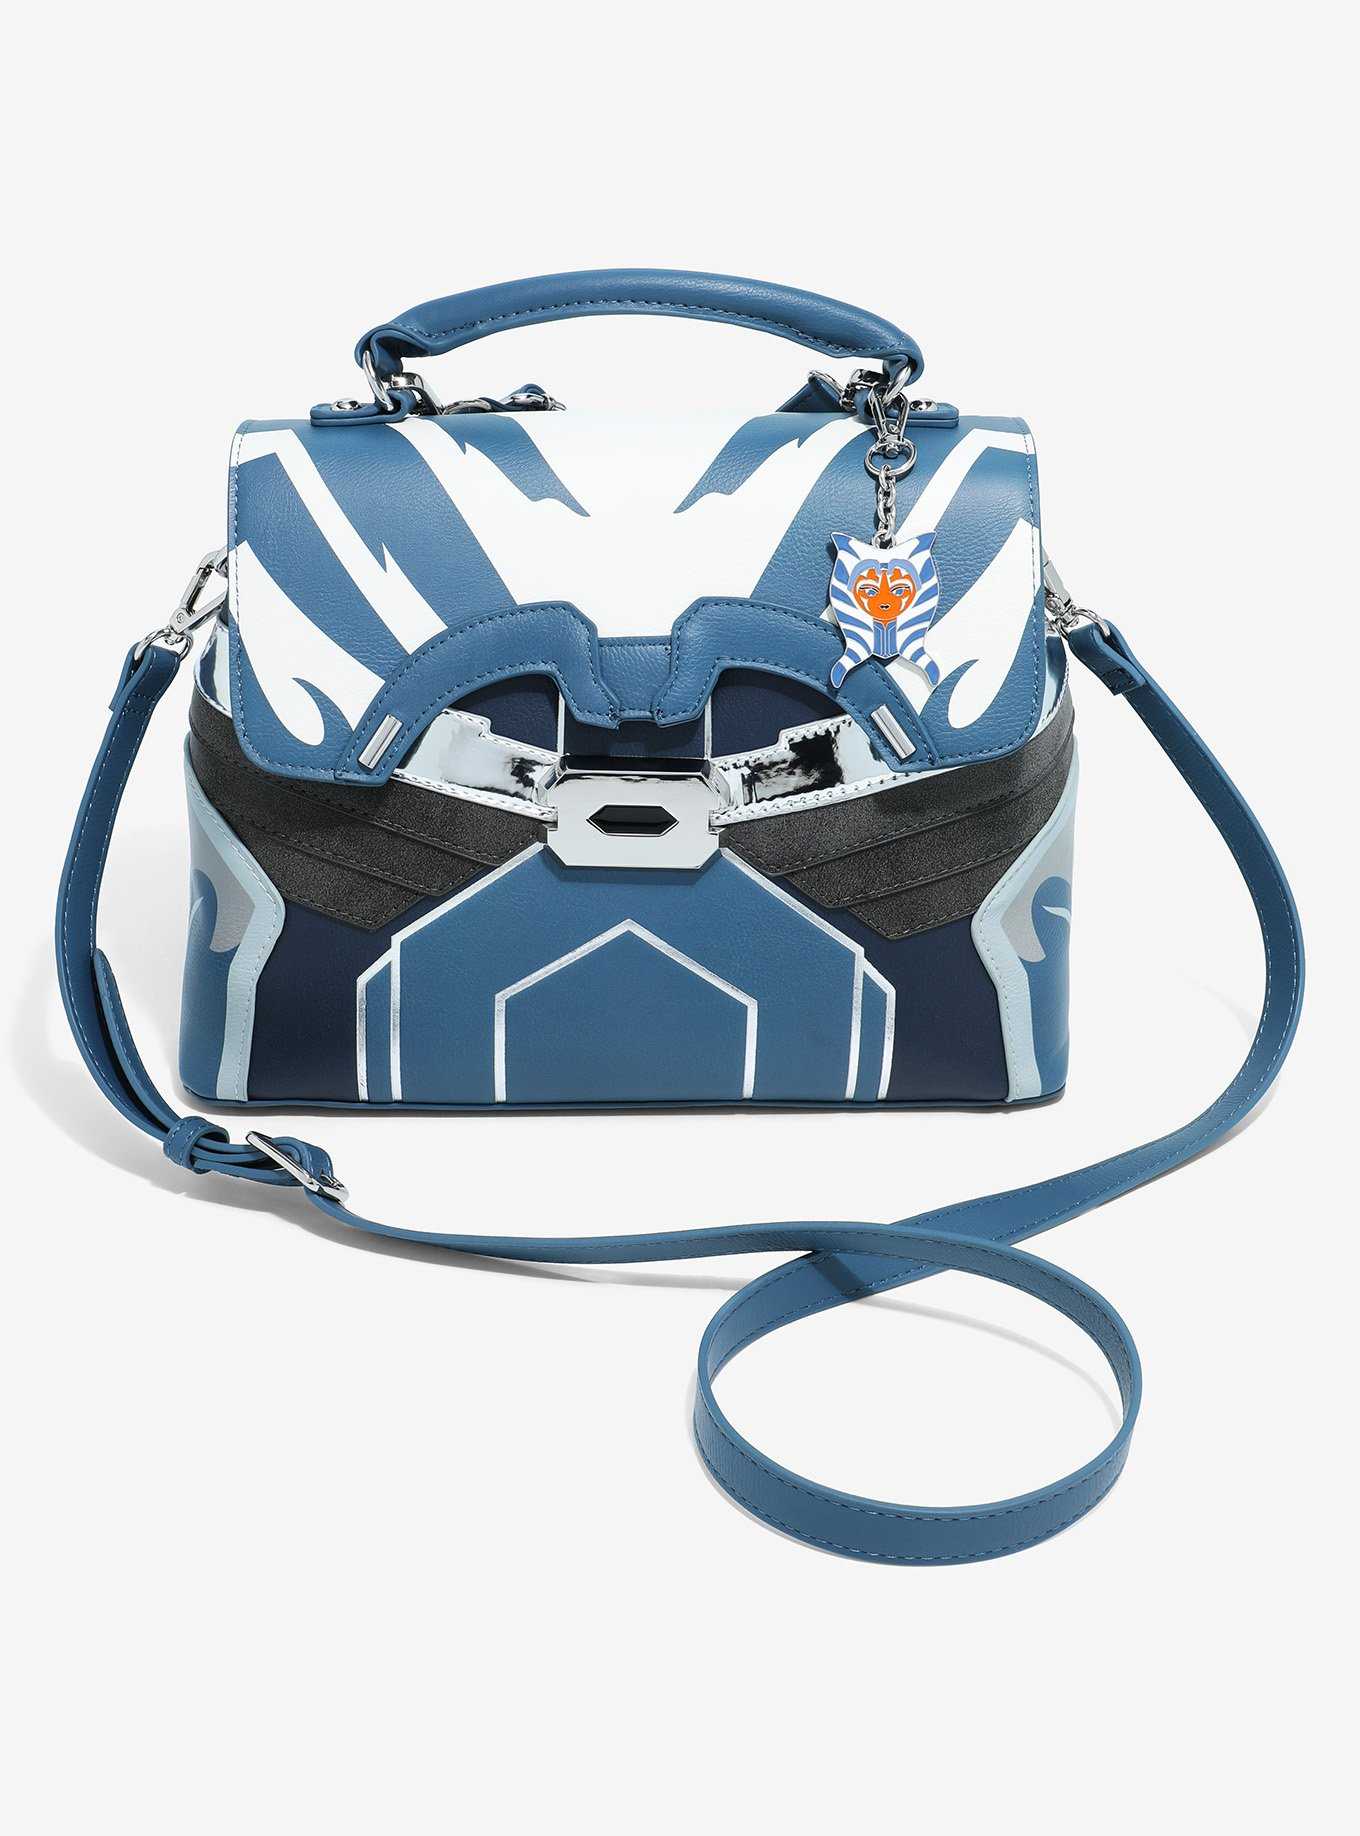 Star Wars Bags, Fangirl Wallets & More